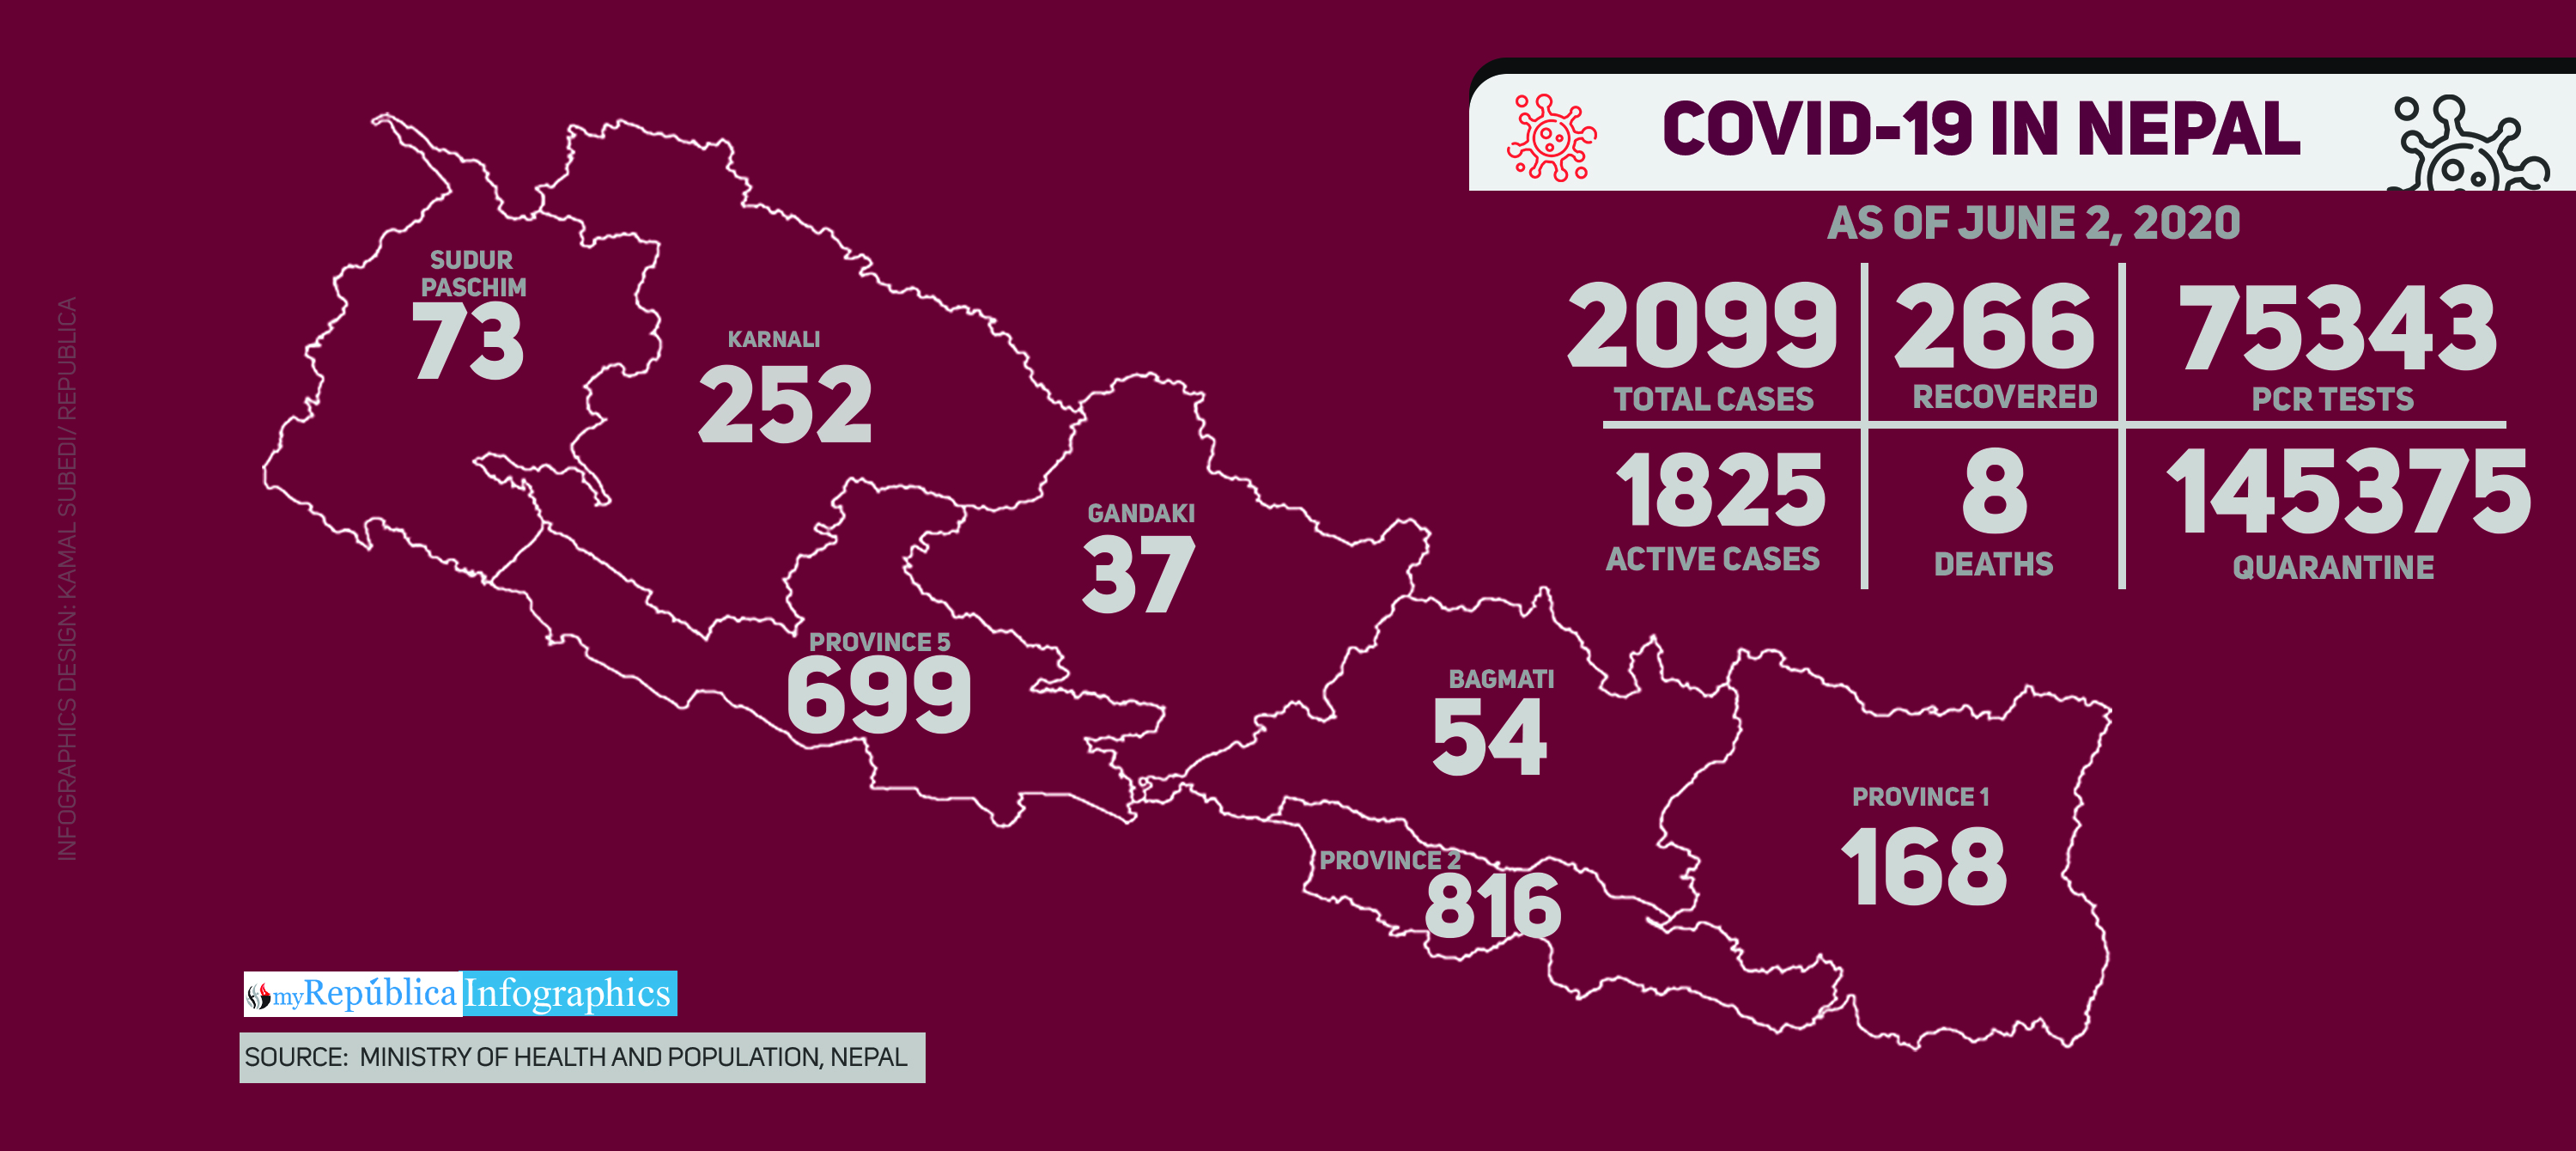 Number of COVID-19 cases in Nepal crosses 2000 mark